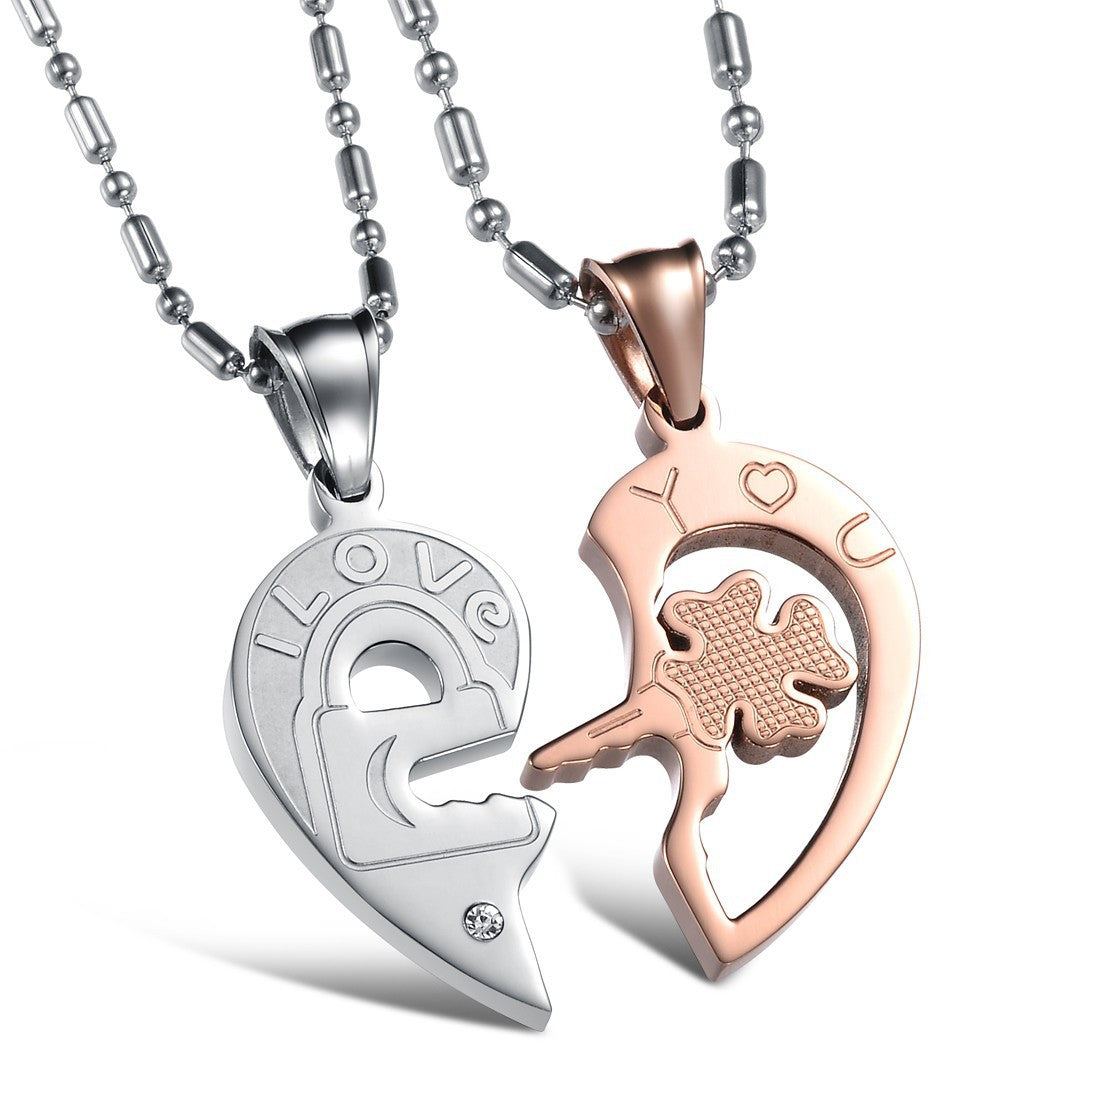 I Love You Lock and Key Heart Shape Couple Necklaces - KINGEOUS